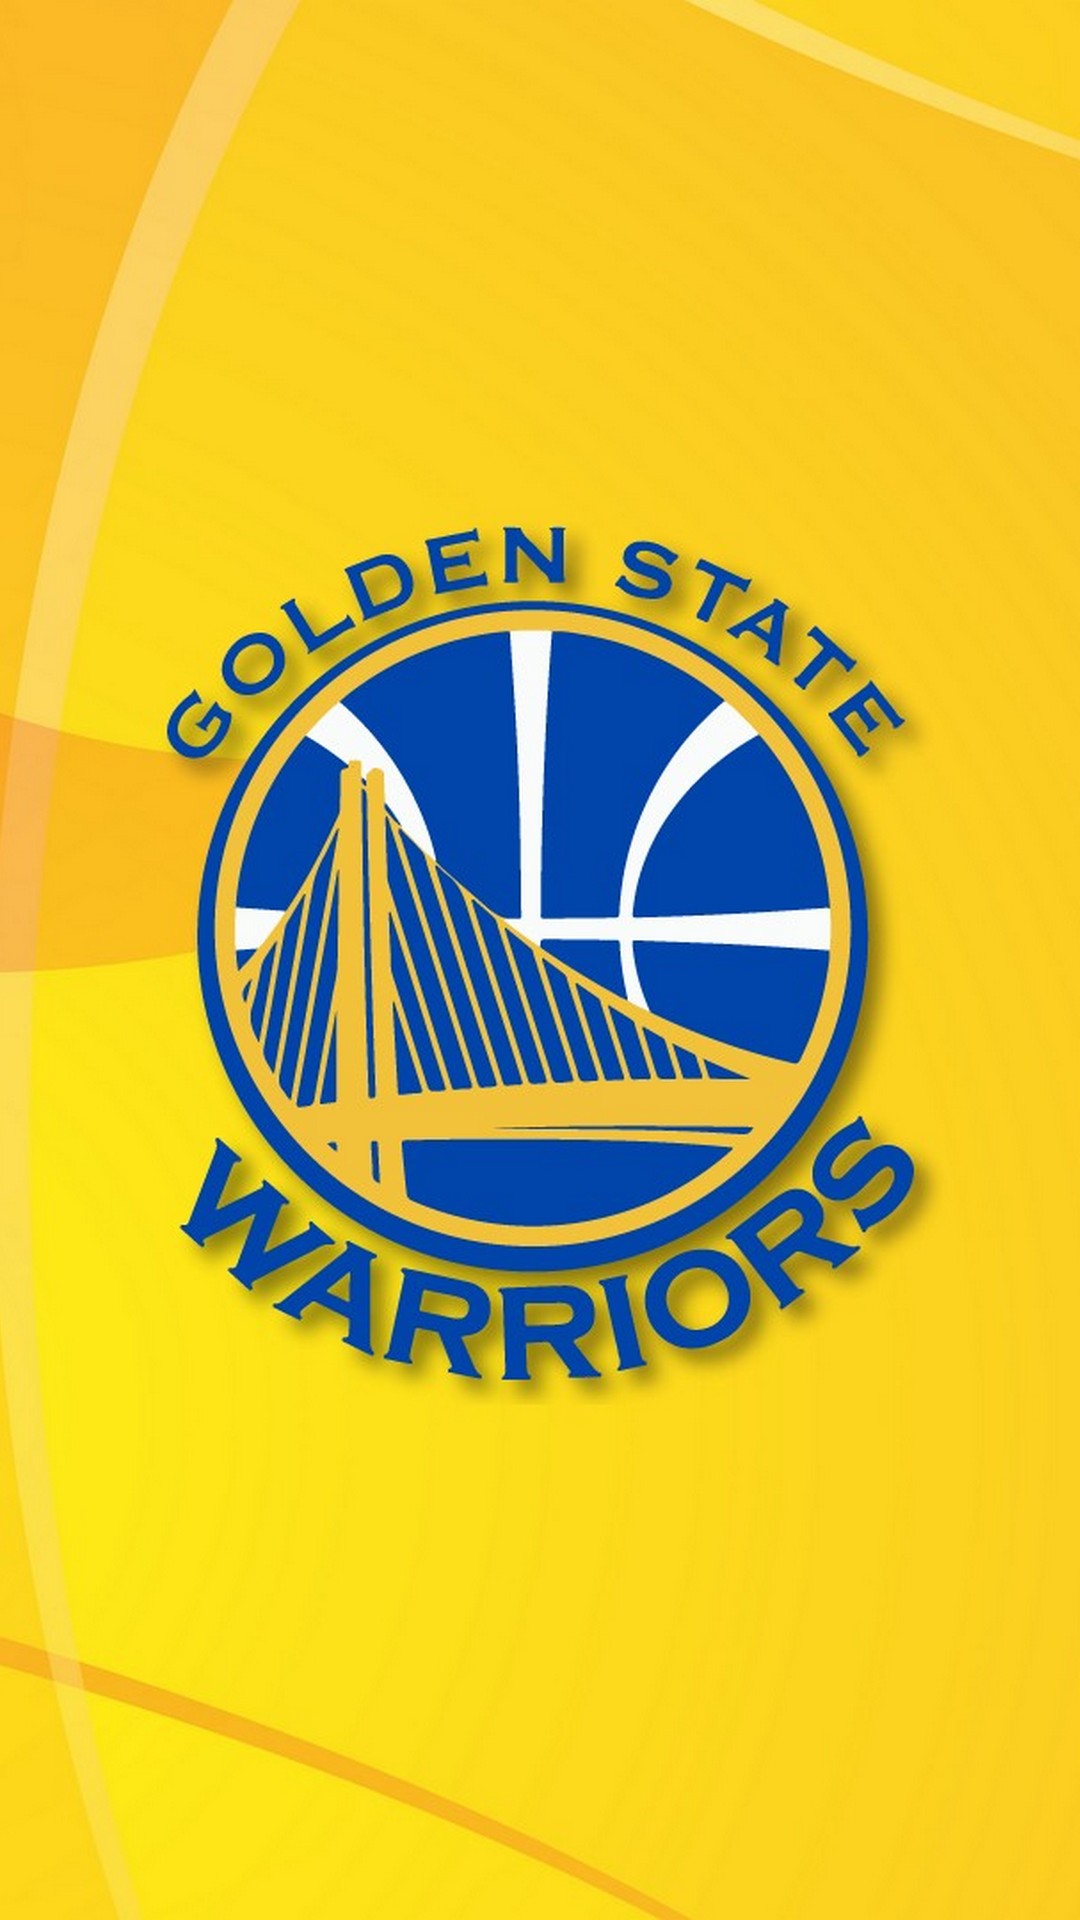 Wallpaper Golden State Warriors iPhone with resolution 1080X1920 pixel. You can use this wallpaper as background for your desktop Computer Screensavers, Android or iPhone smartphones